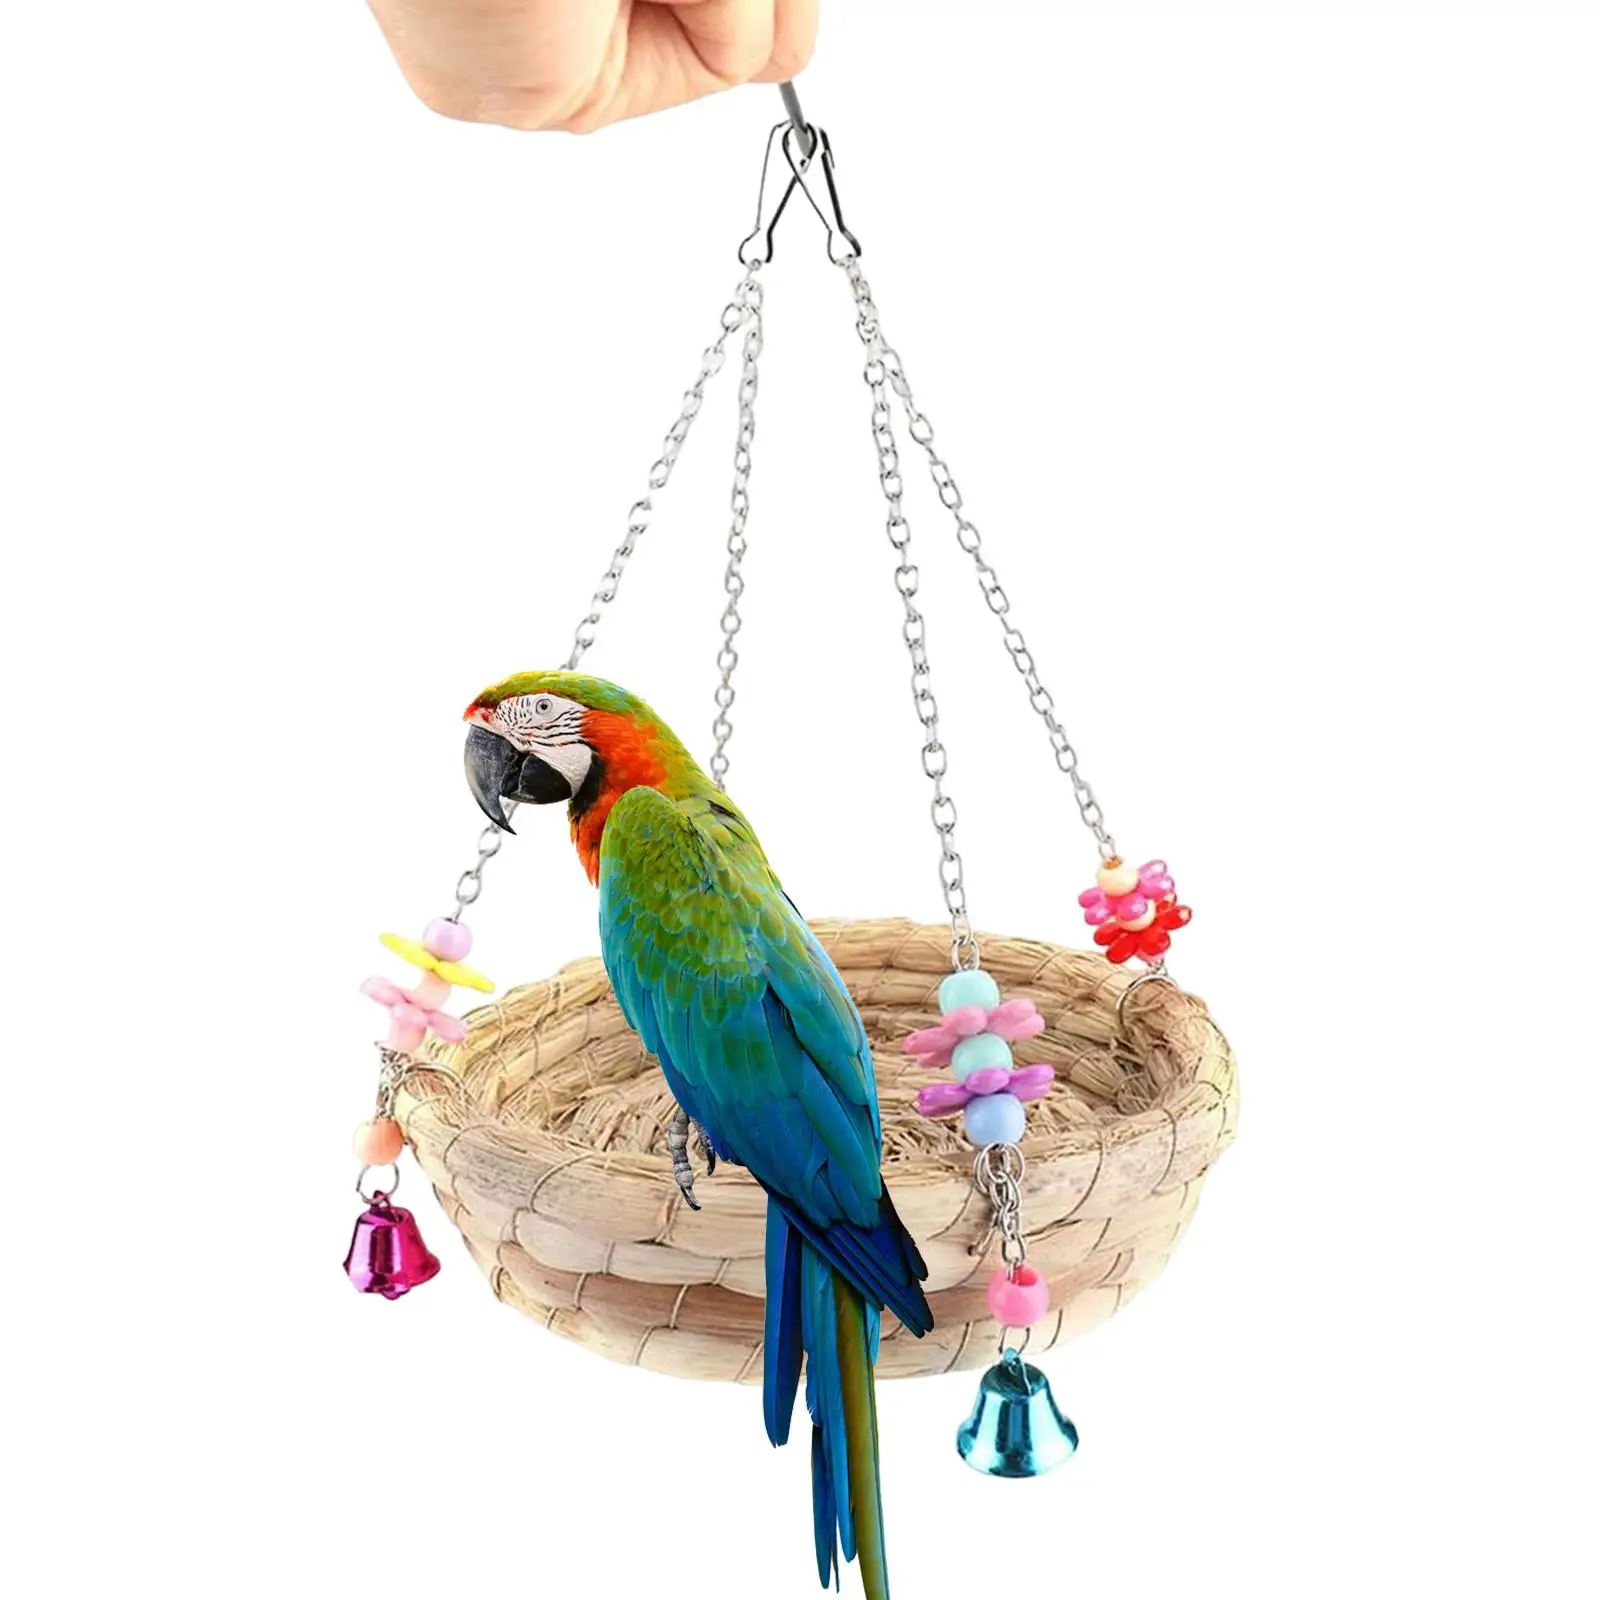 Home Bird Straws Swing Toy Woven Straw Lightweight Stable Parrot Toys Nest Bed for Cockatiel Finches Bird Budgie Climbing